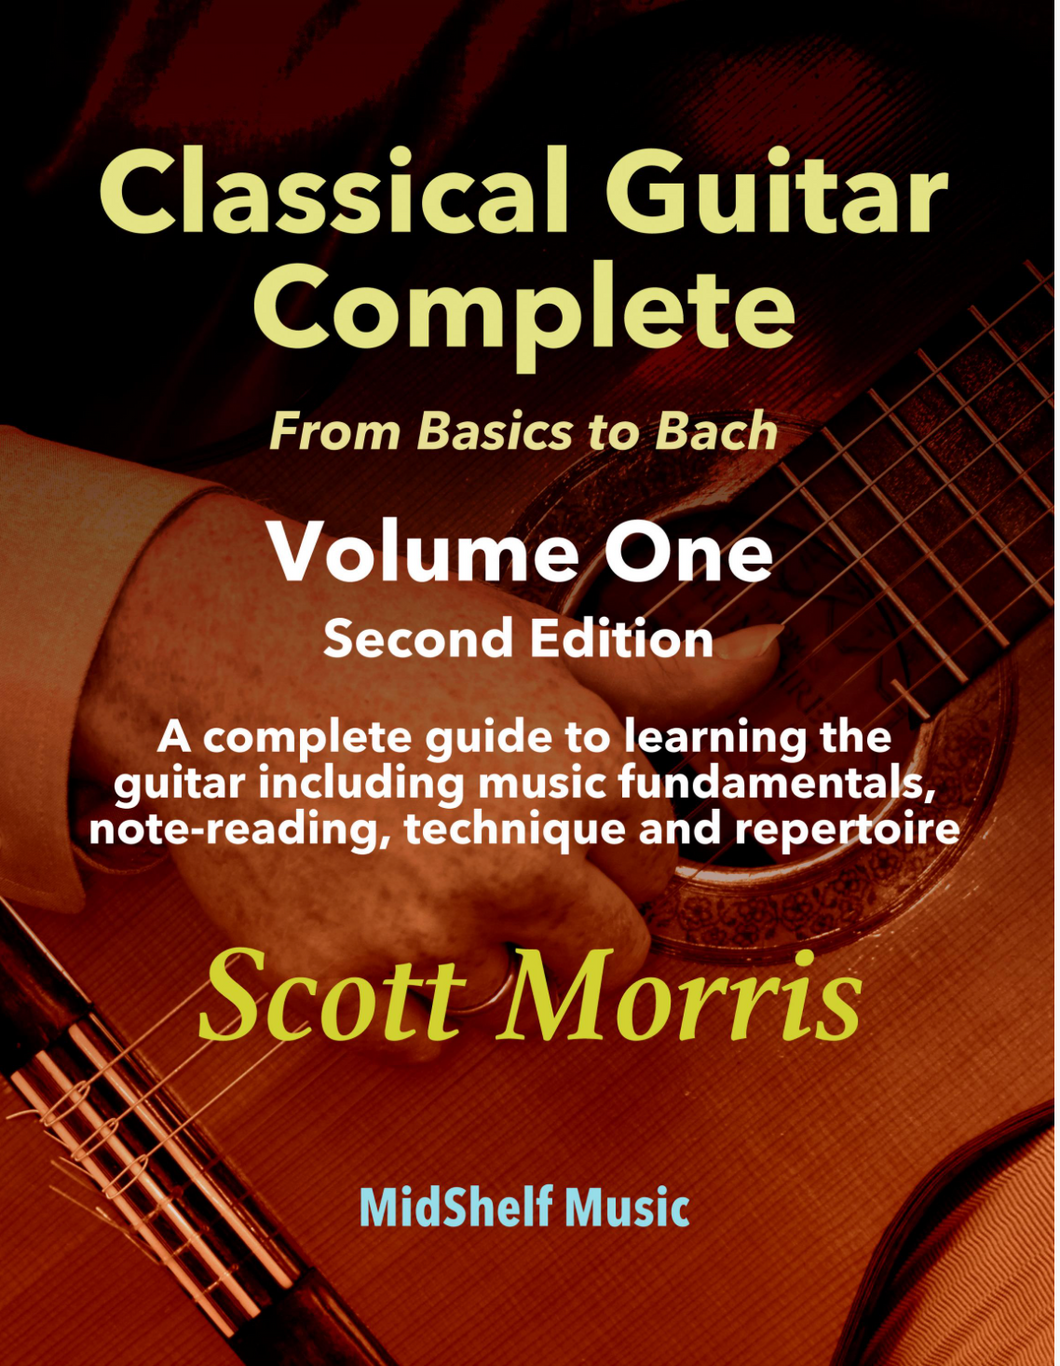 Classical Guitar Complete: From Basics to Bach (Volume One) - Digital Version